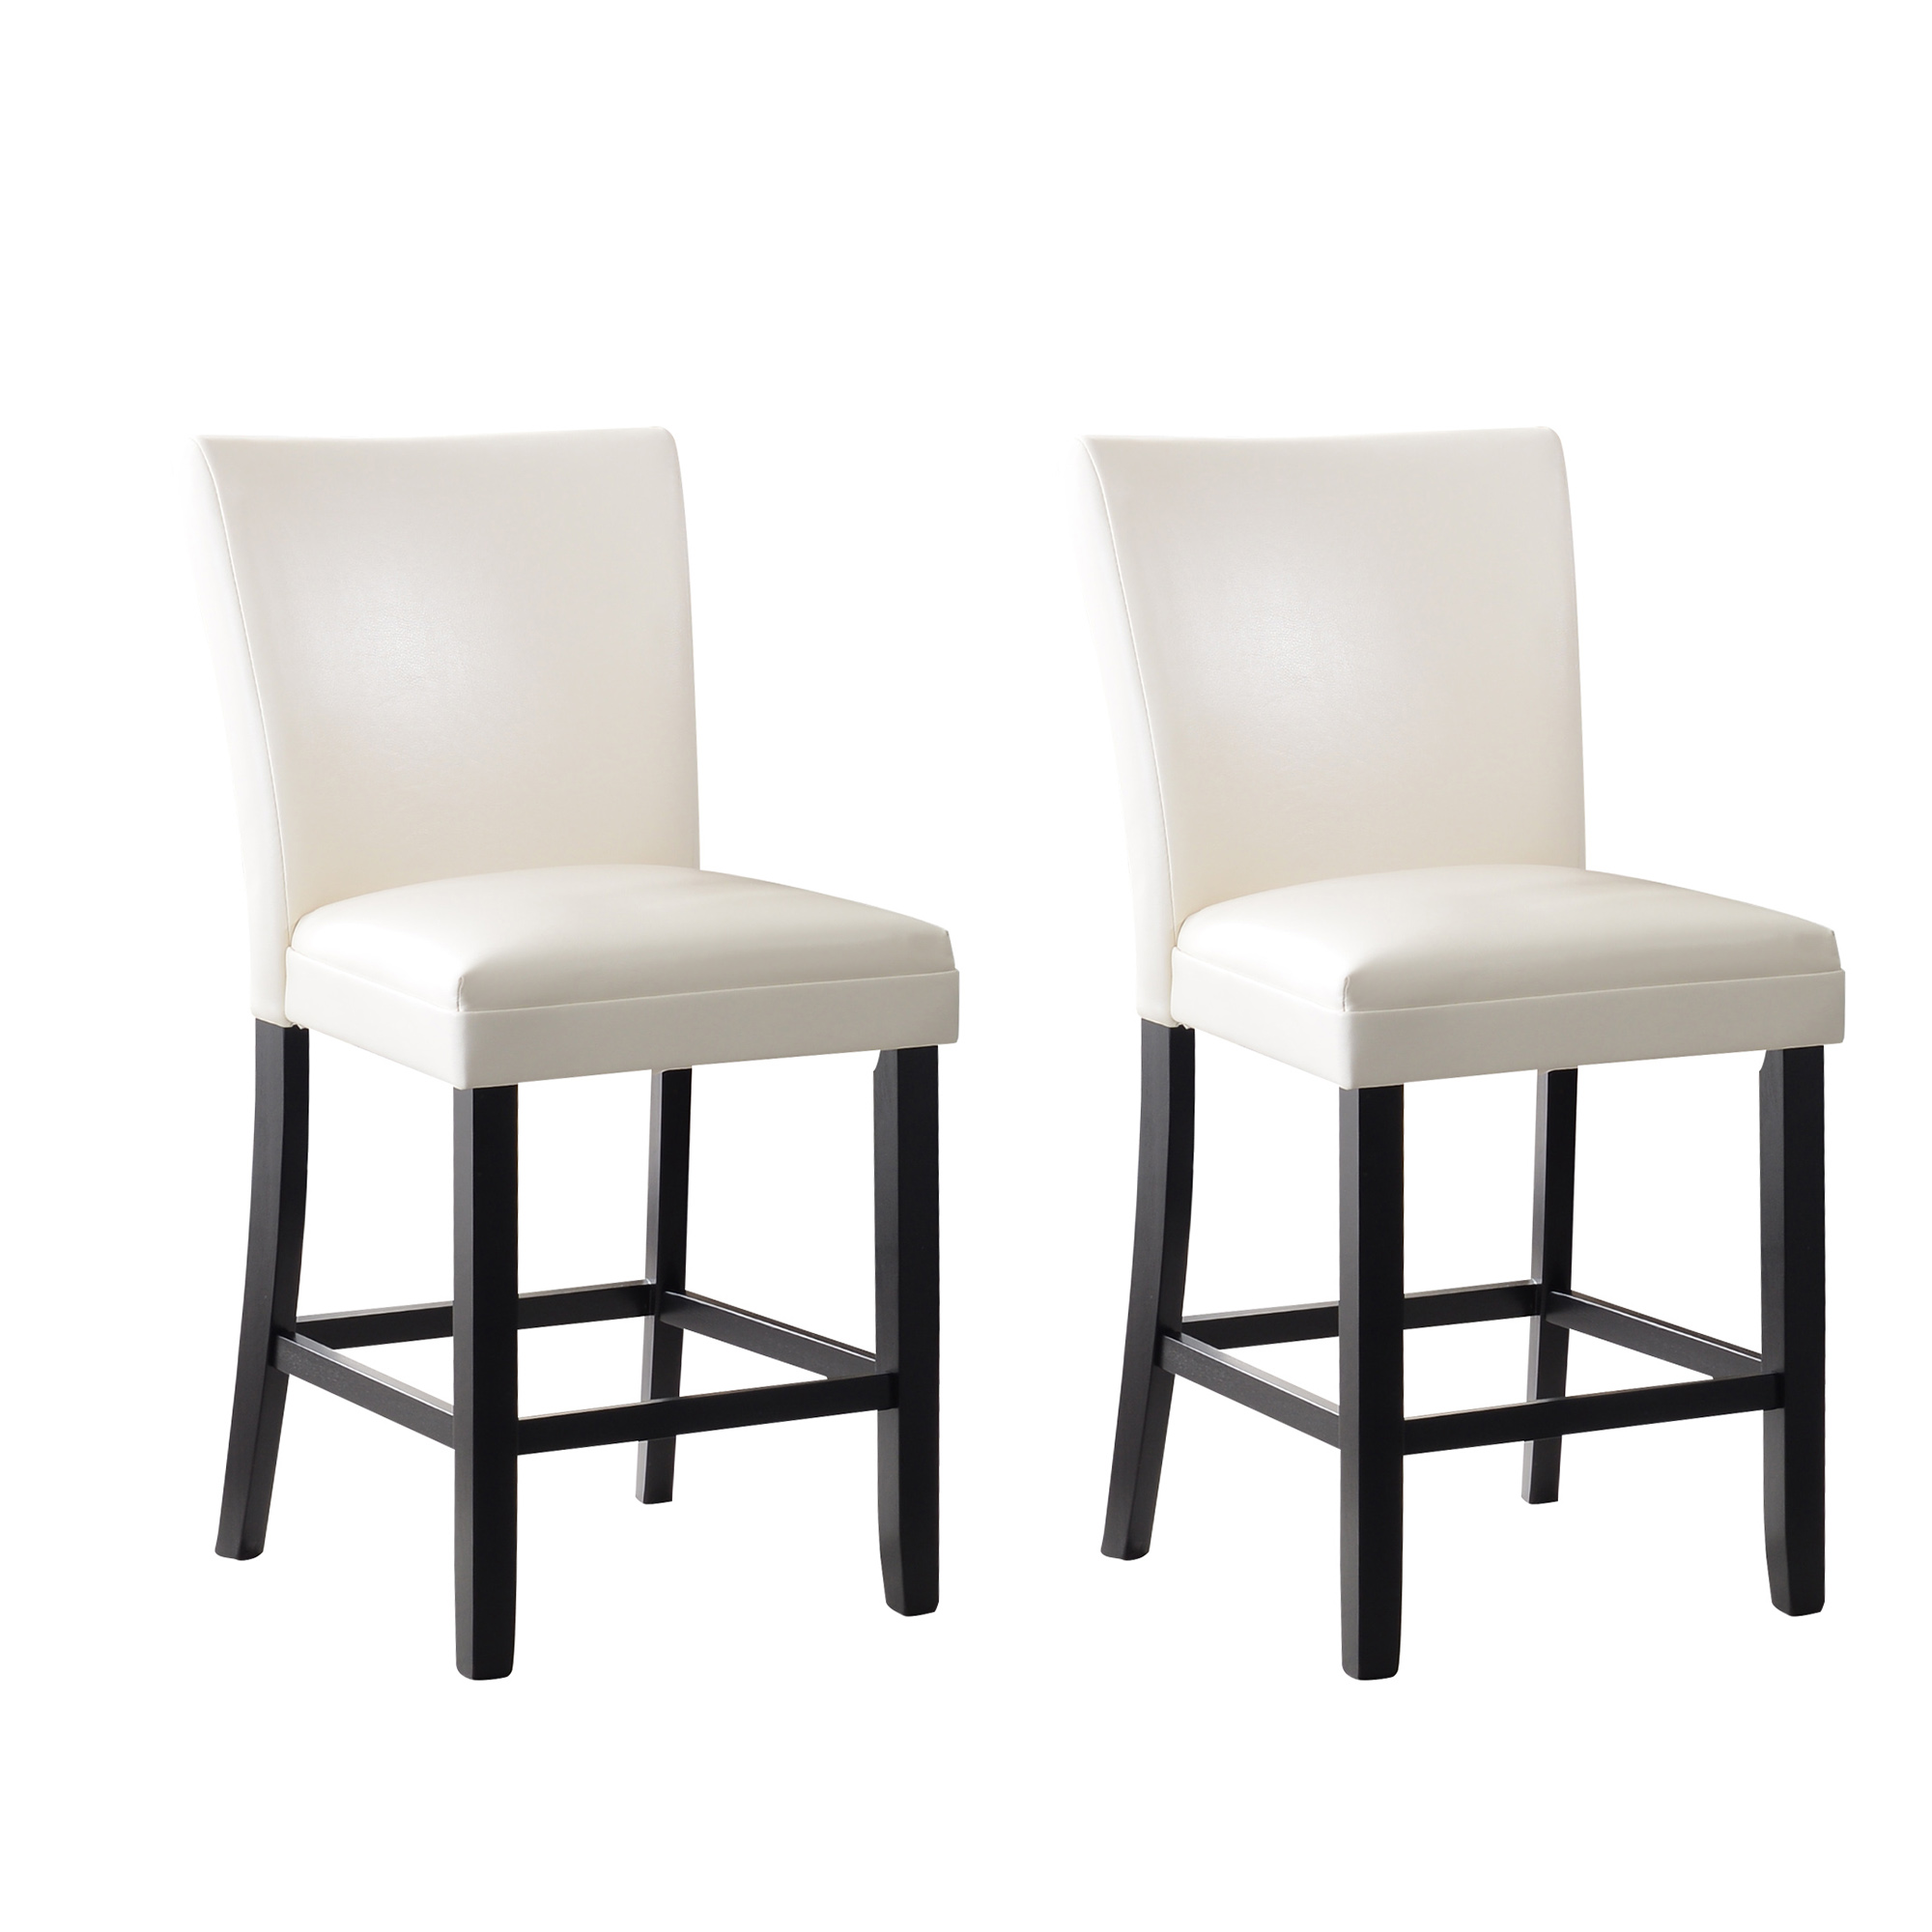 Solid Wood High elasticity Counter Stool White (Set of 2)-CASAINC